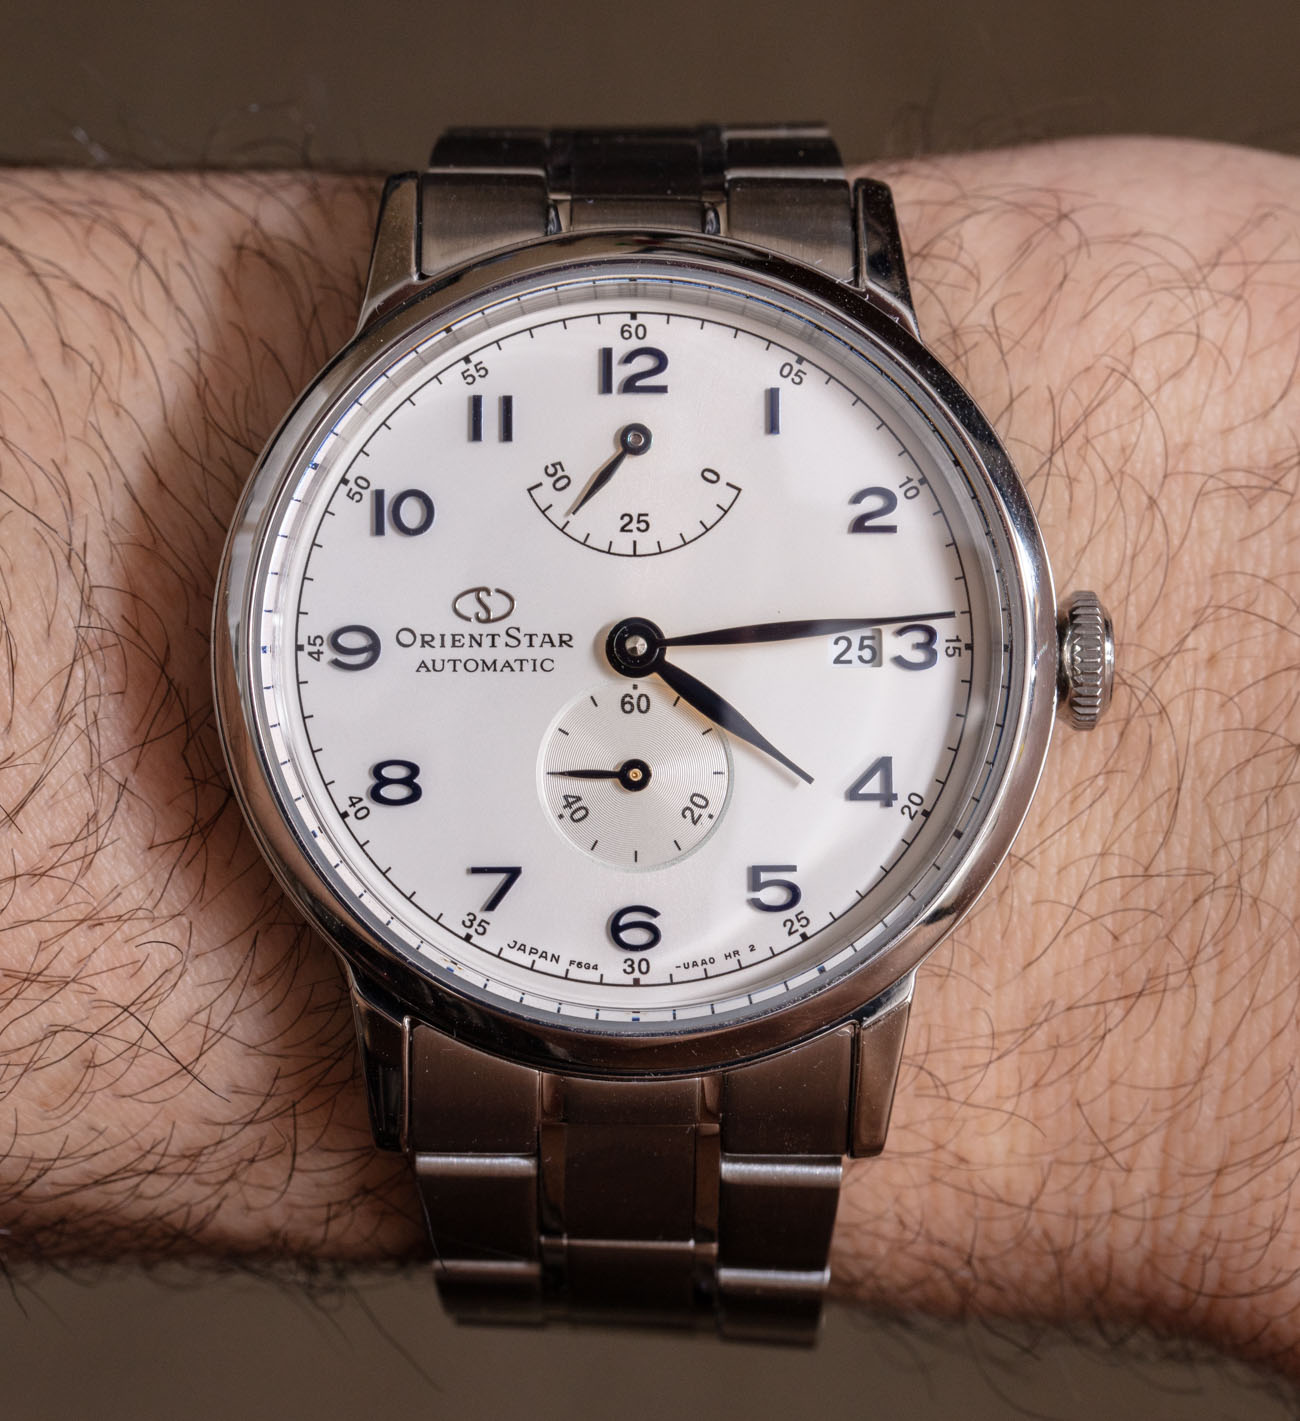 Watch Review: Orient Star Heritage Gothic RE-AW0006S | aBlogtoWatch